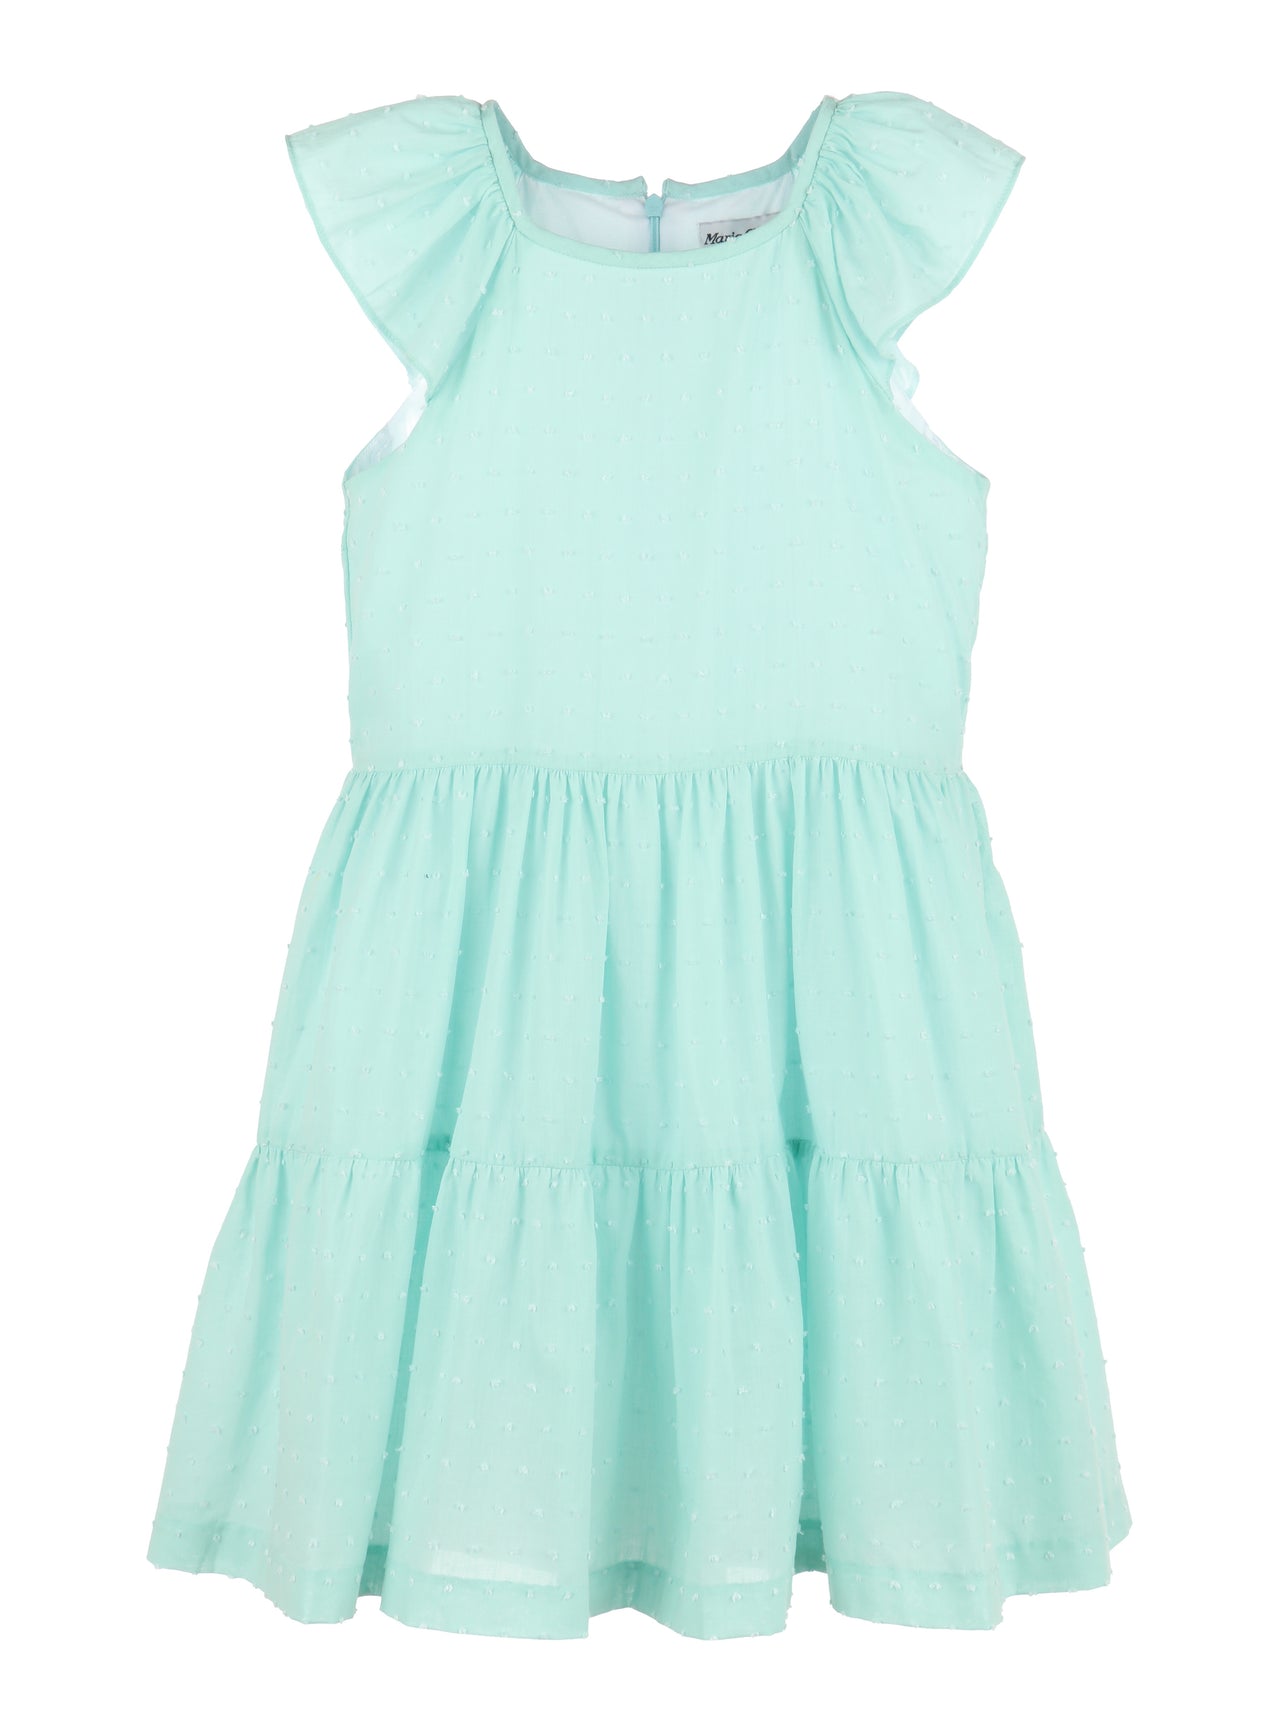 Maria Casero Dotted Tiered Dress Mint 8581 5011